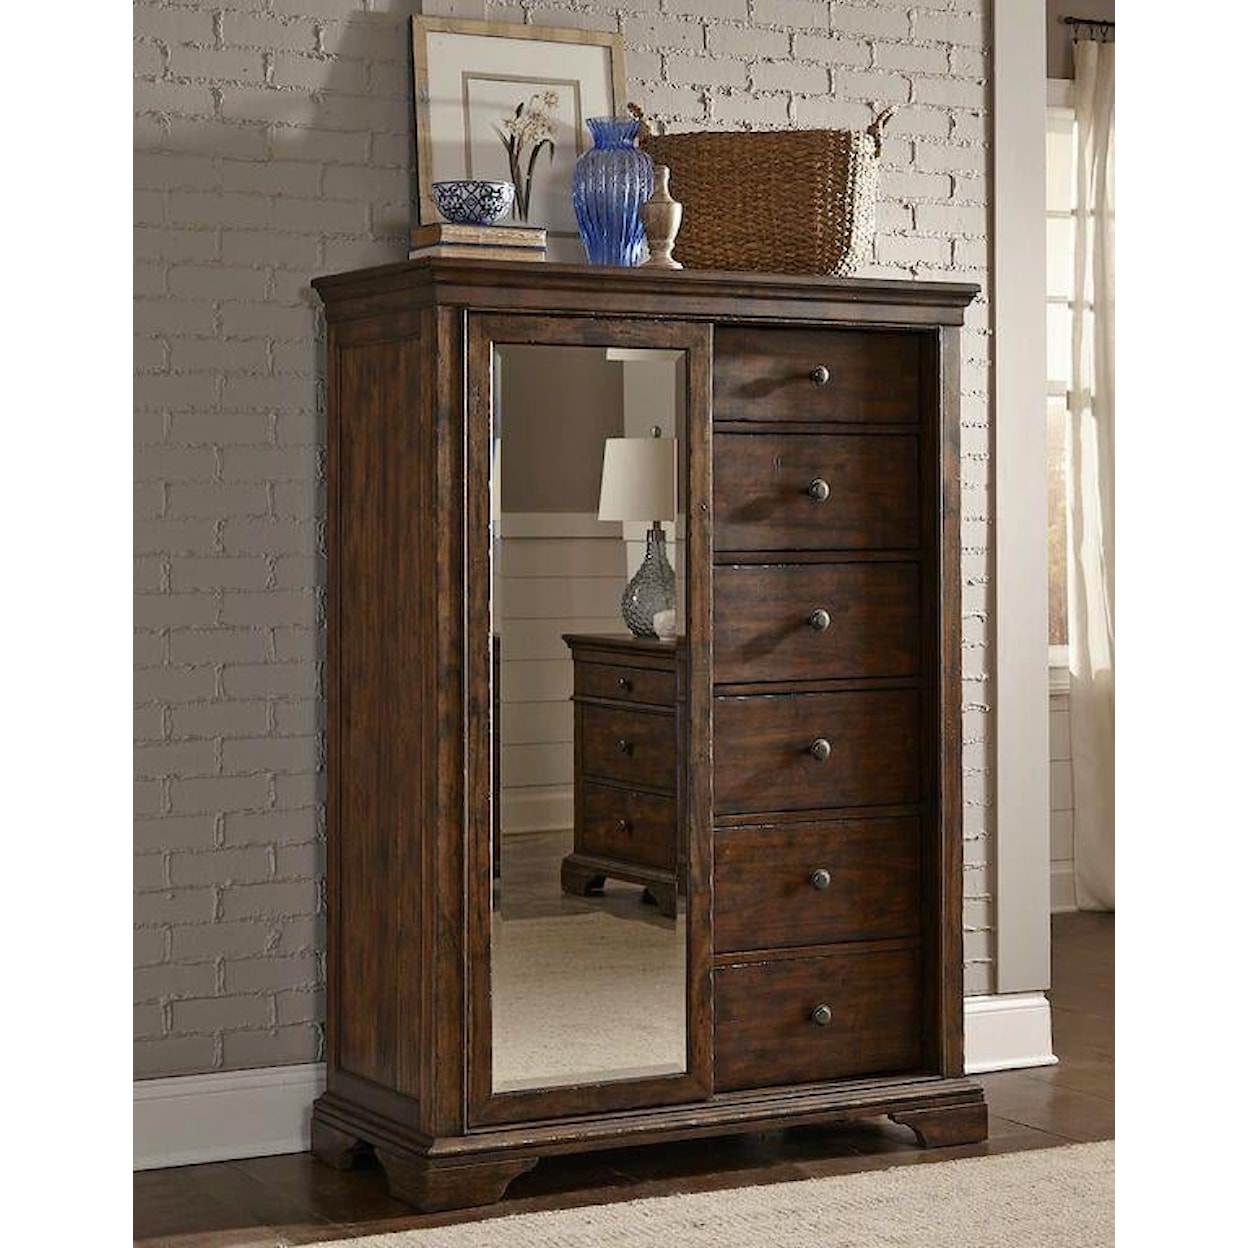 Trisha Yearwood Home Collection by Legacy Classic Trisha Yearwood Home Tulsa Door Chest